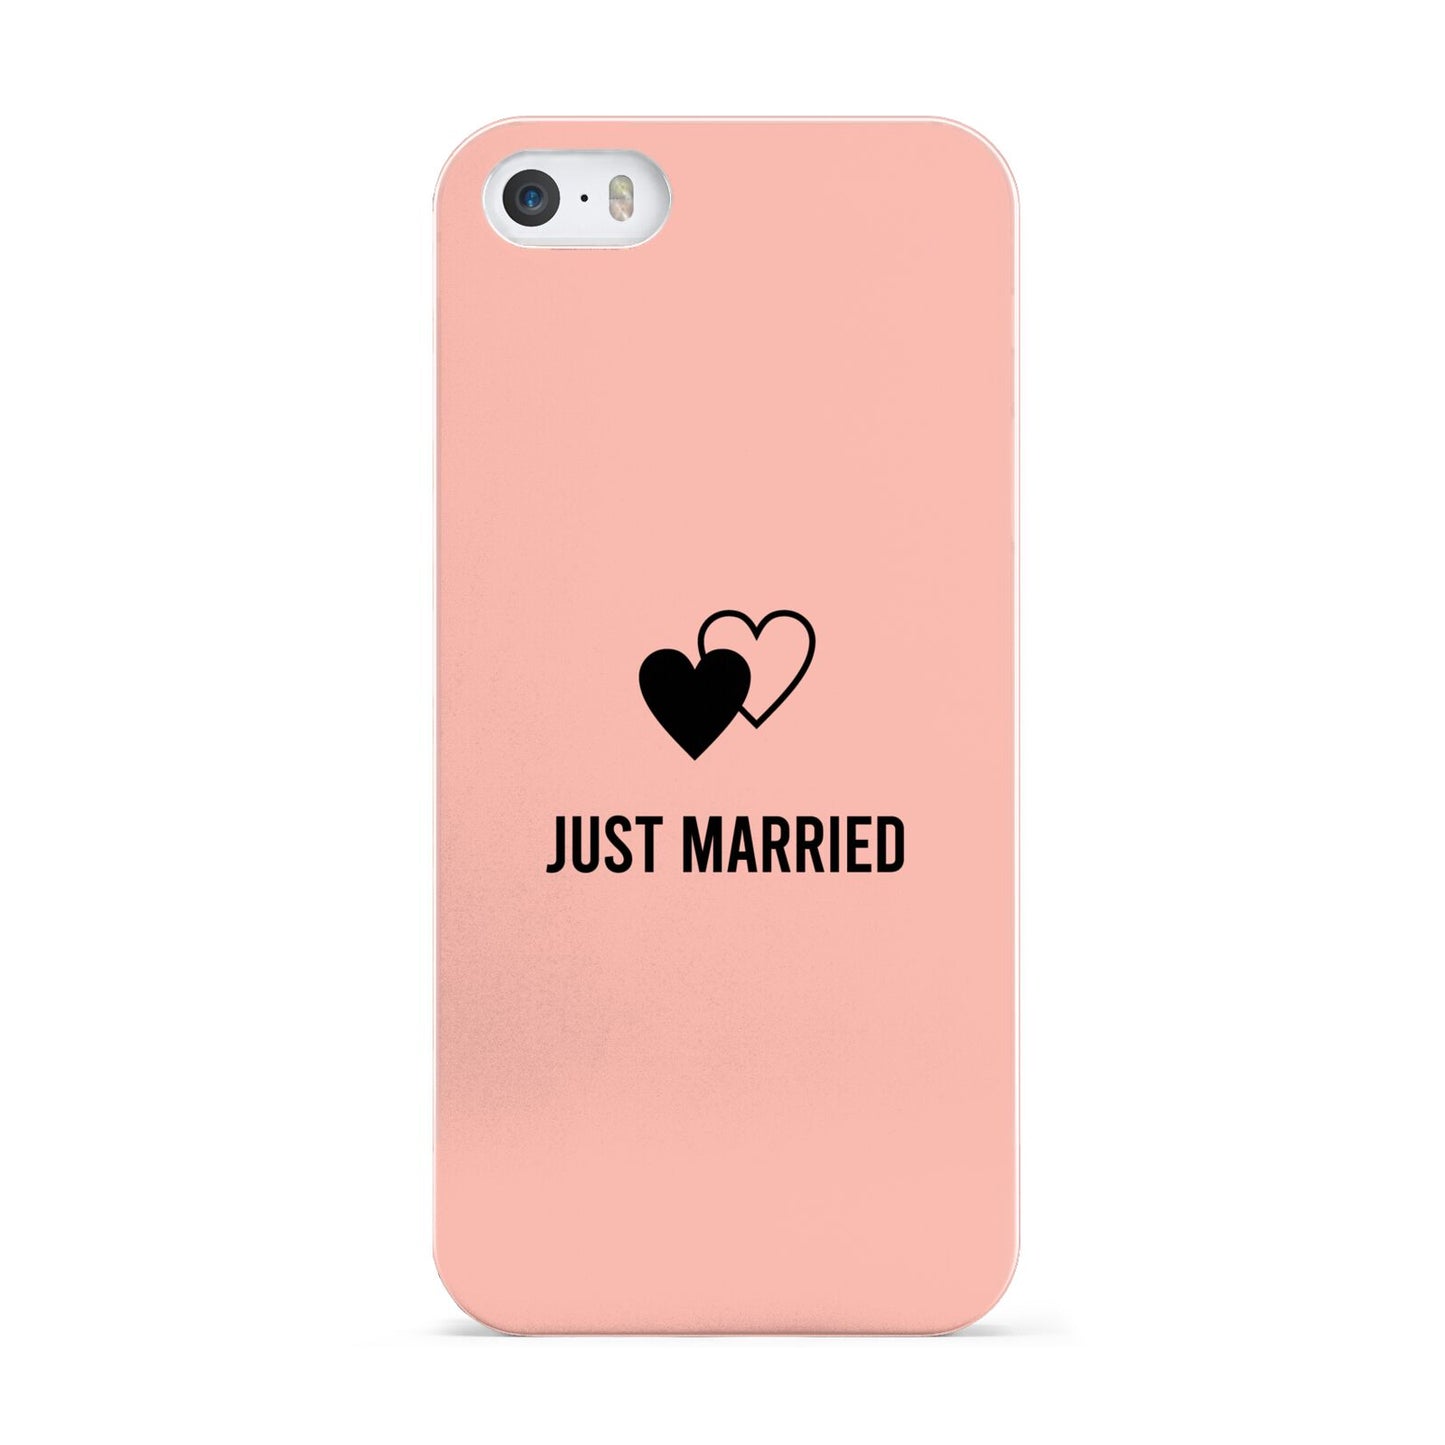 Just Married Apple iPhone 5 Case